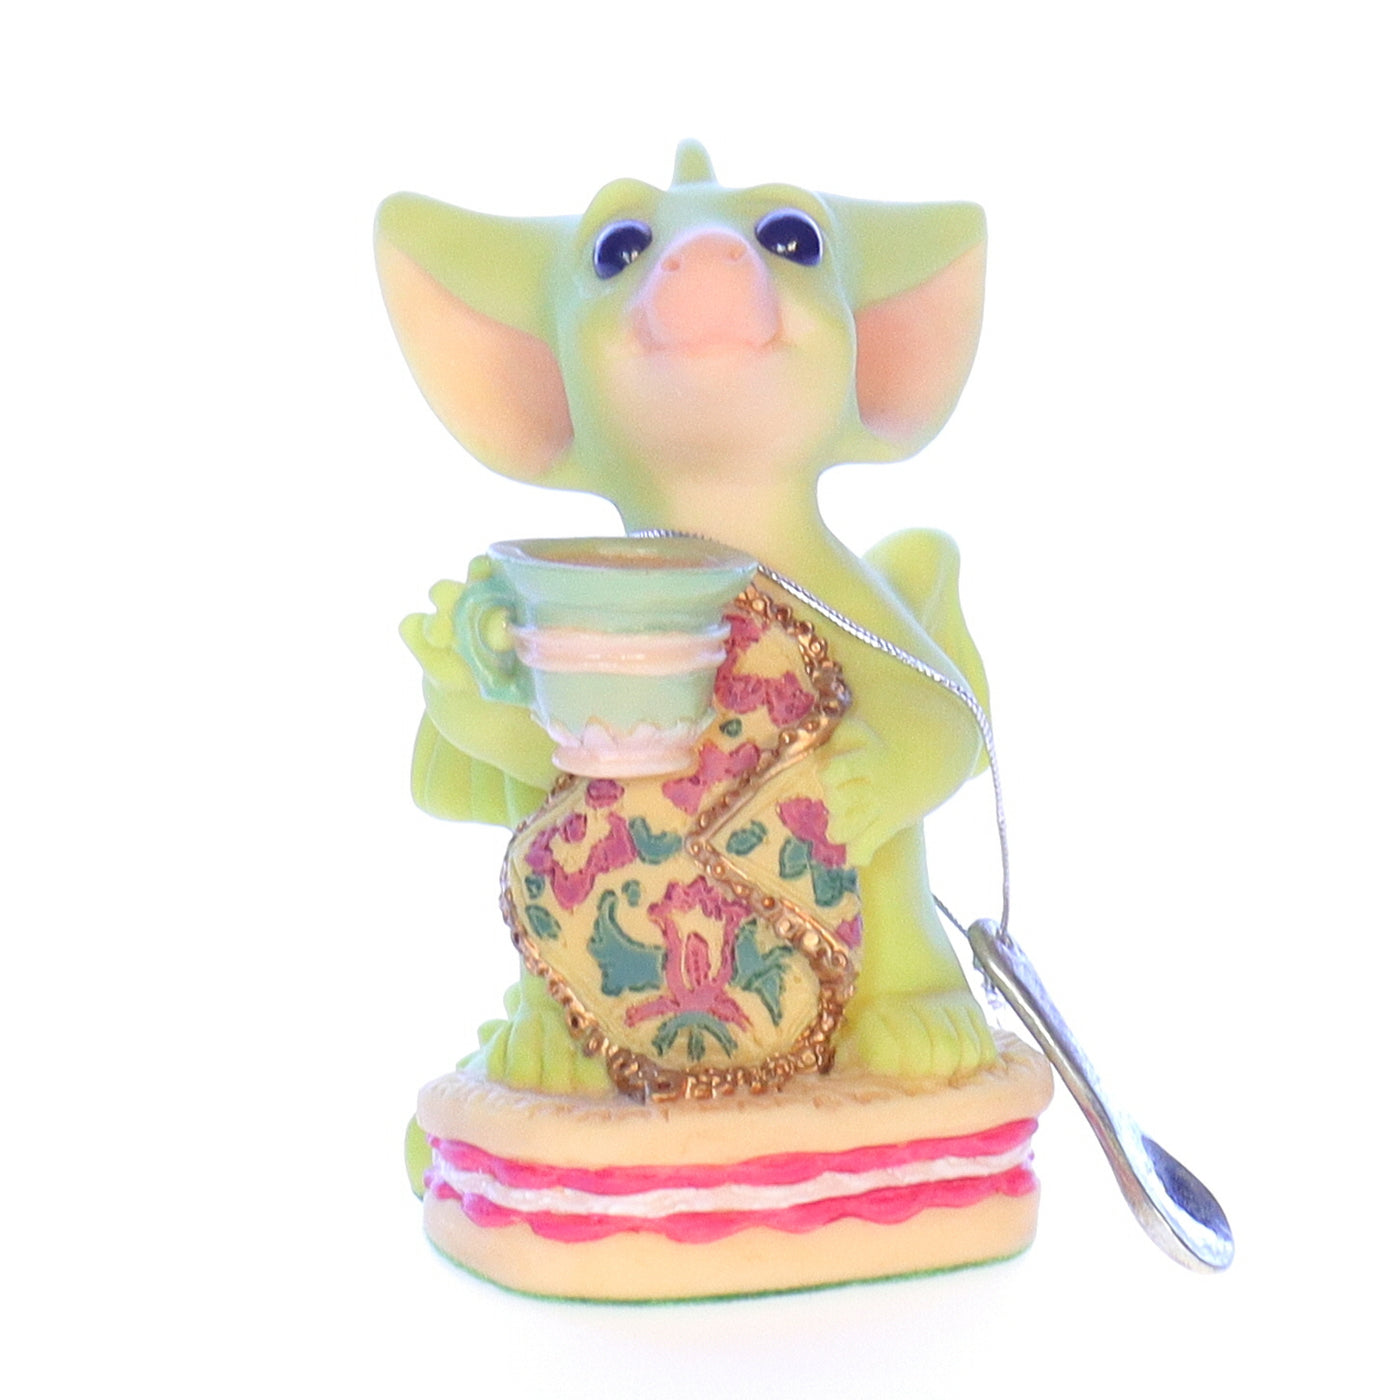 Whimsical_World_of_Pocket_Dragons_002798_Time_For_Tea_Tea_Figurine_2000_Box Front View